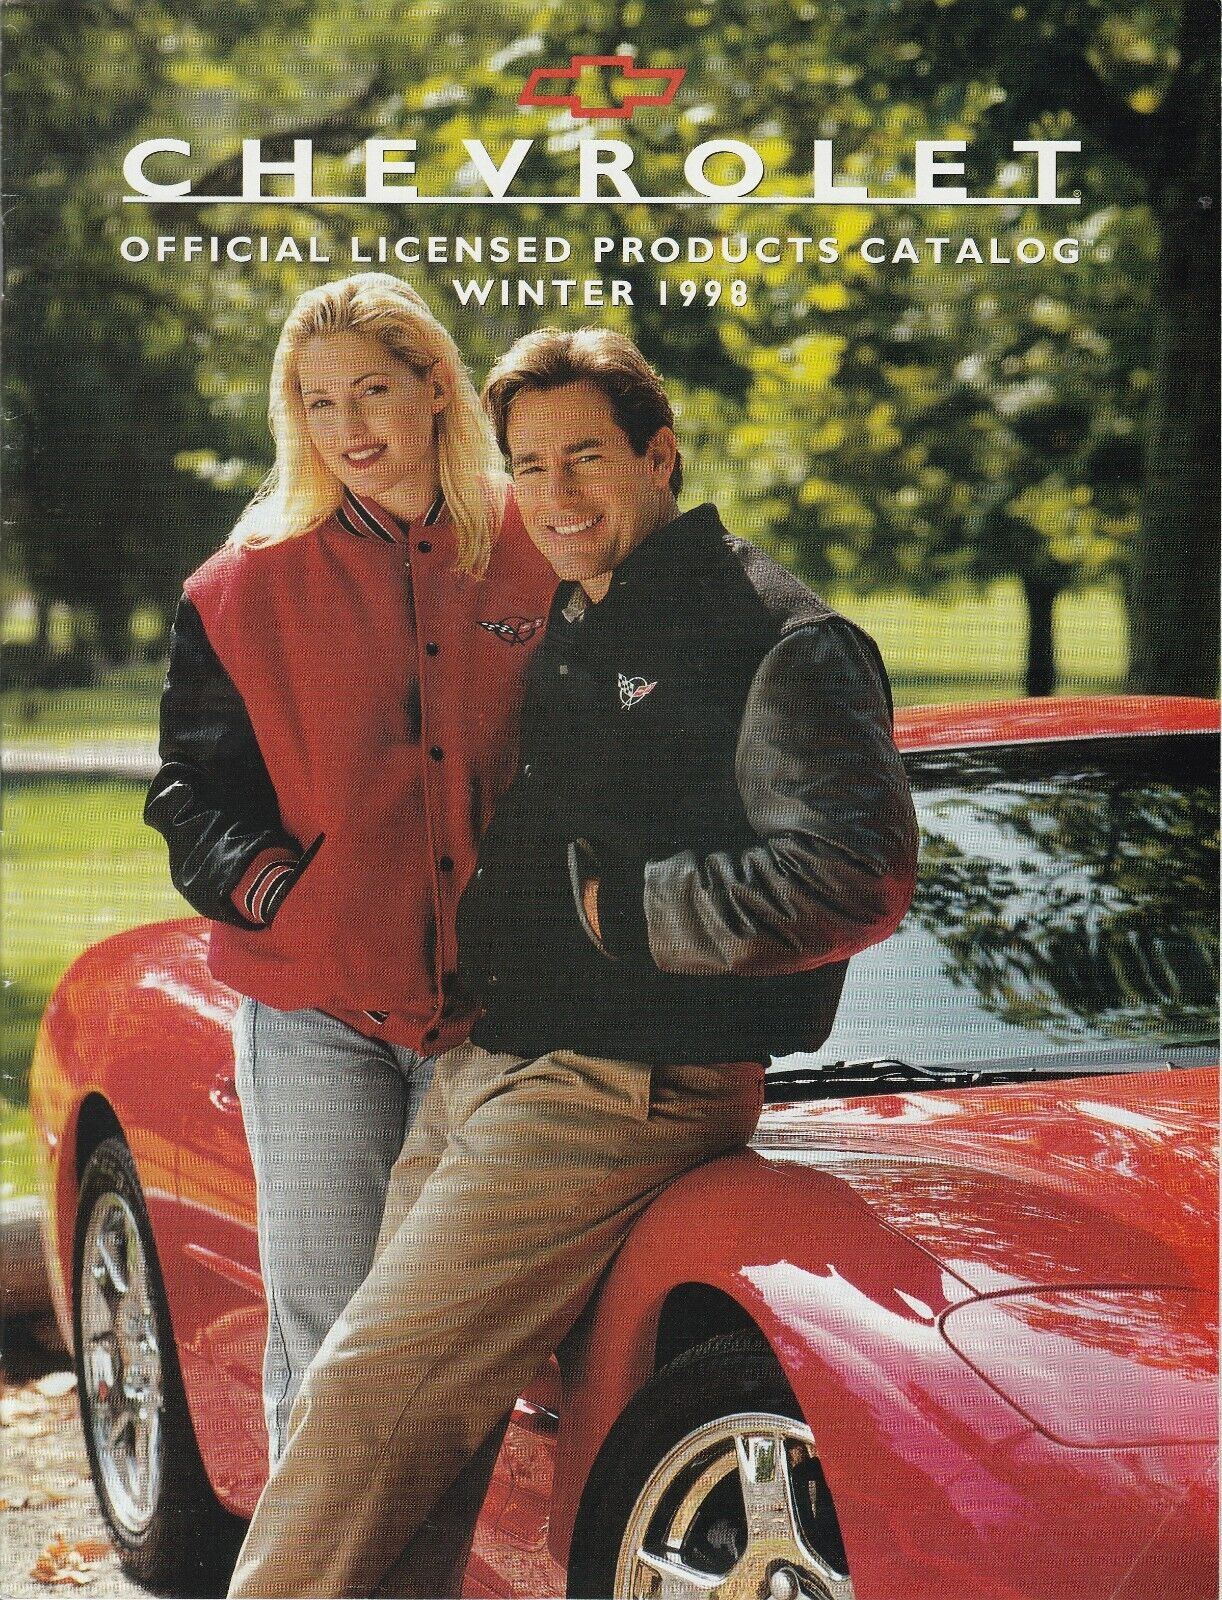 1998 Chevrolet Officially Licensed Products Catalog Winter 52 pages